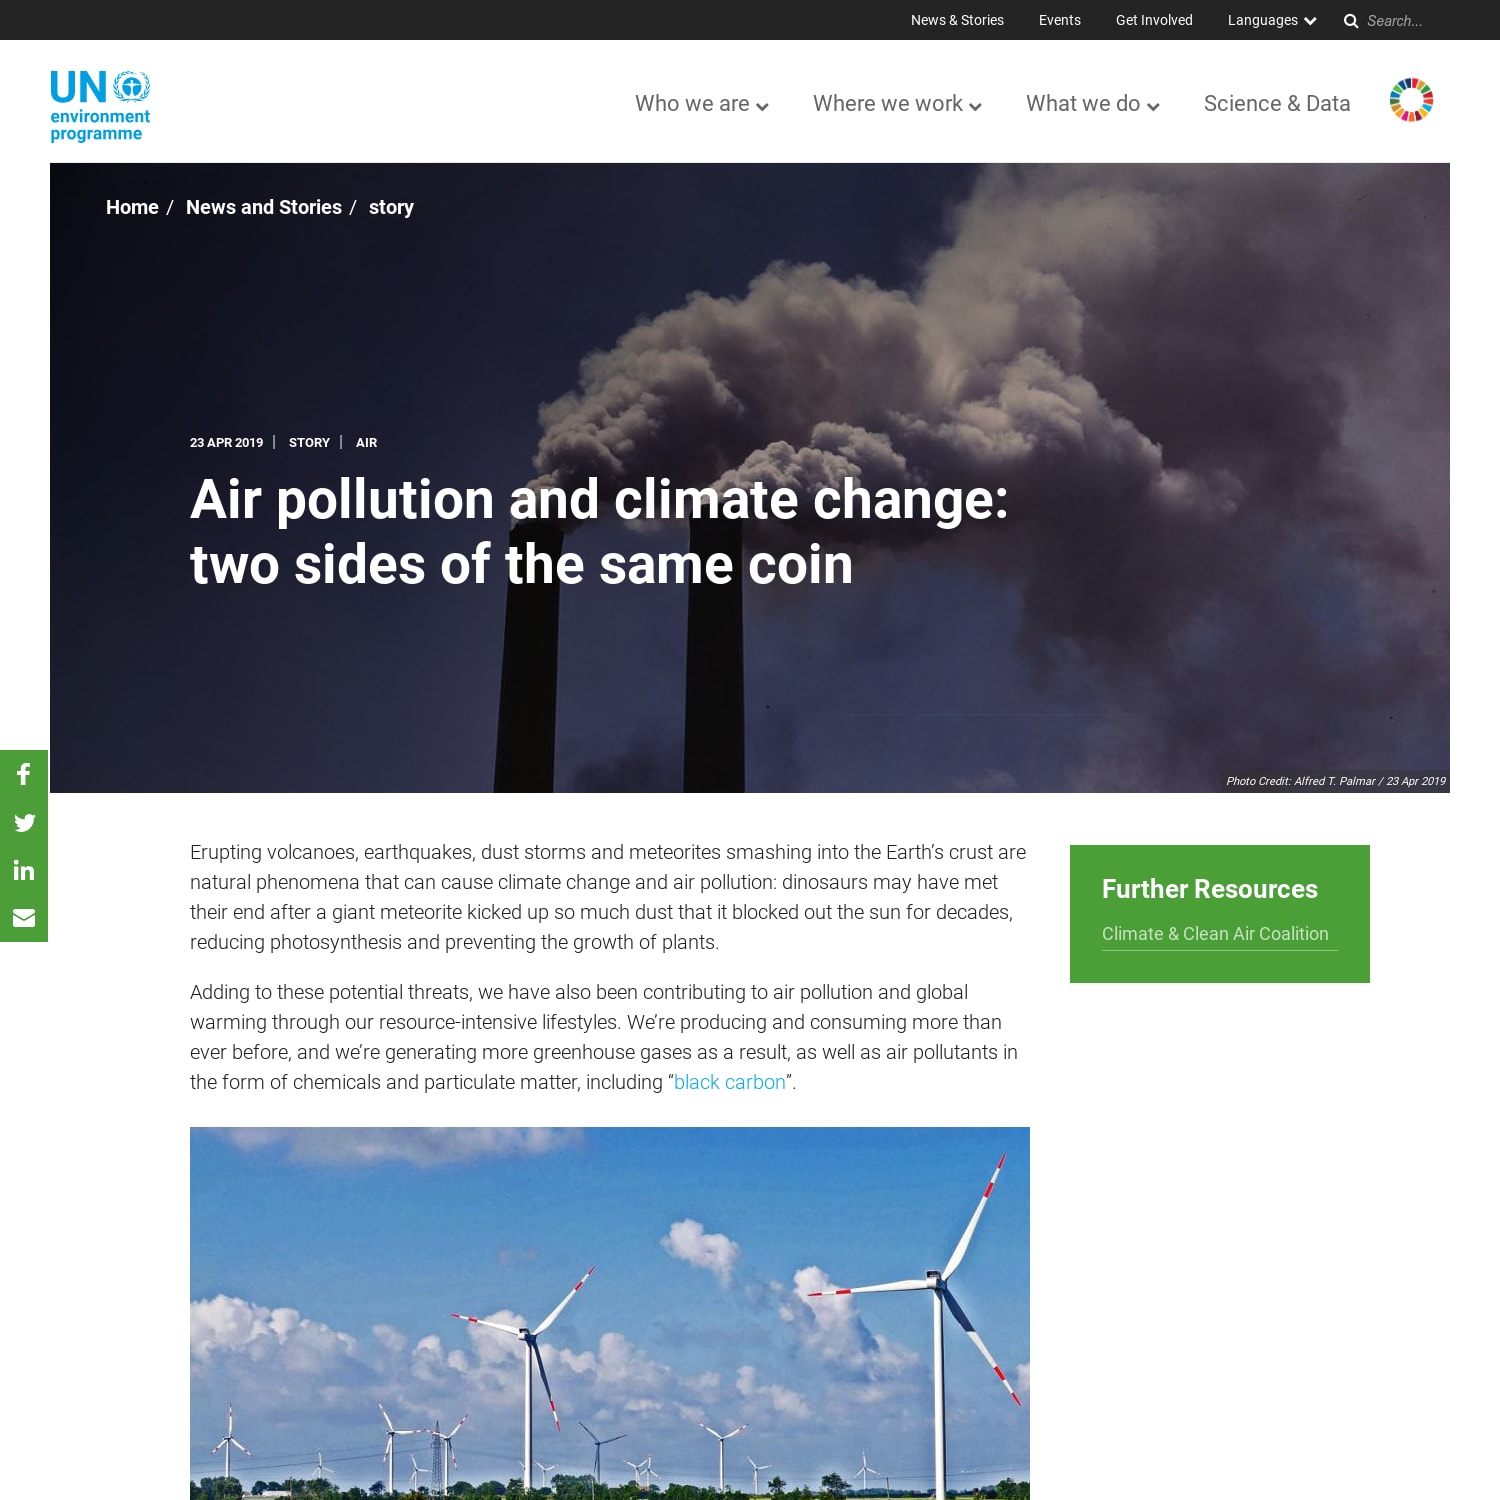 Air pollution and climate change: two sides of the same coin